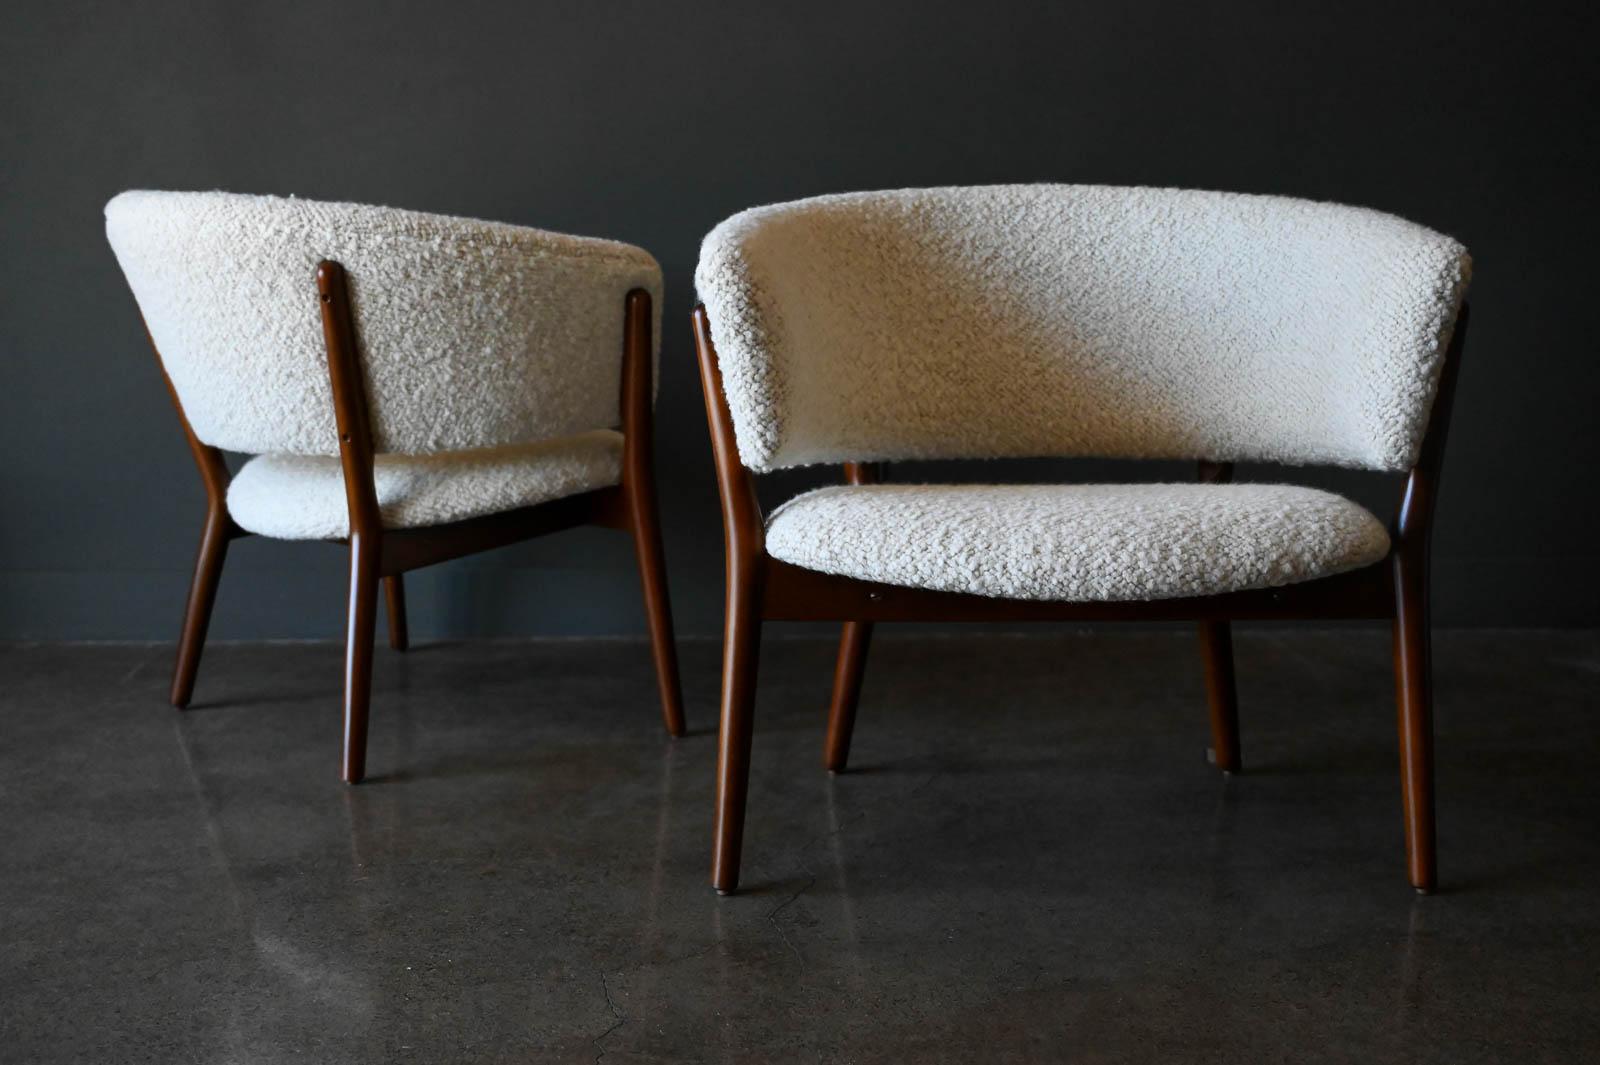 Pair of Nanna Ditzel Model 83 Lounge chairs in Pierre Frey Wool Bouclé, 1952. Original pair, professionally restored walnut finish with top of the line soft Pierre Frey Wool Boucle. Beautifully designed and very comfortable, these chairs are highly